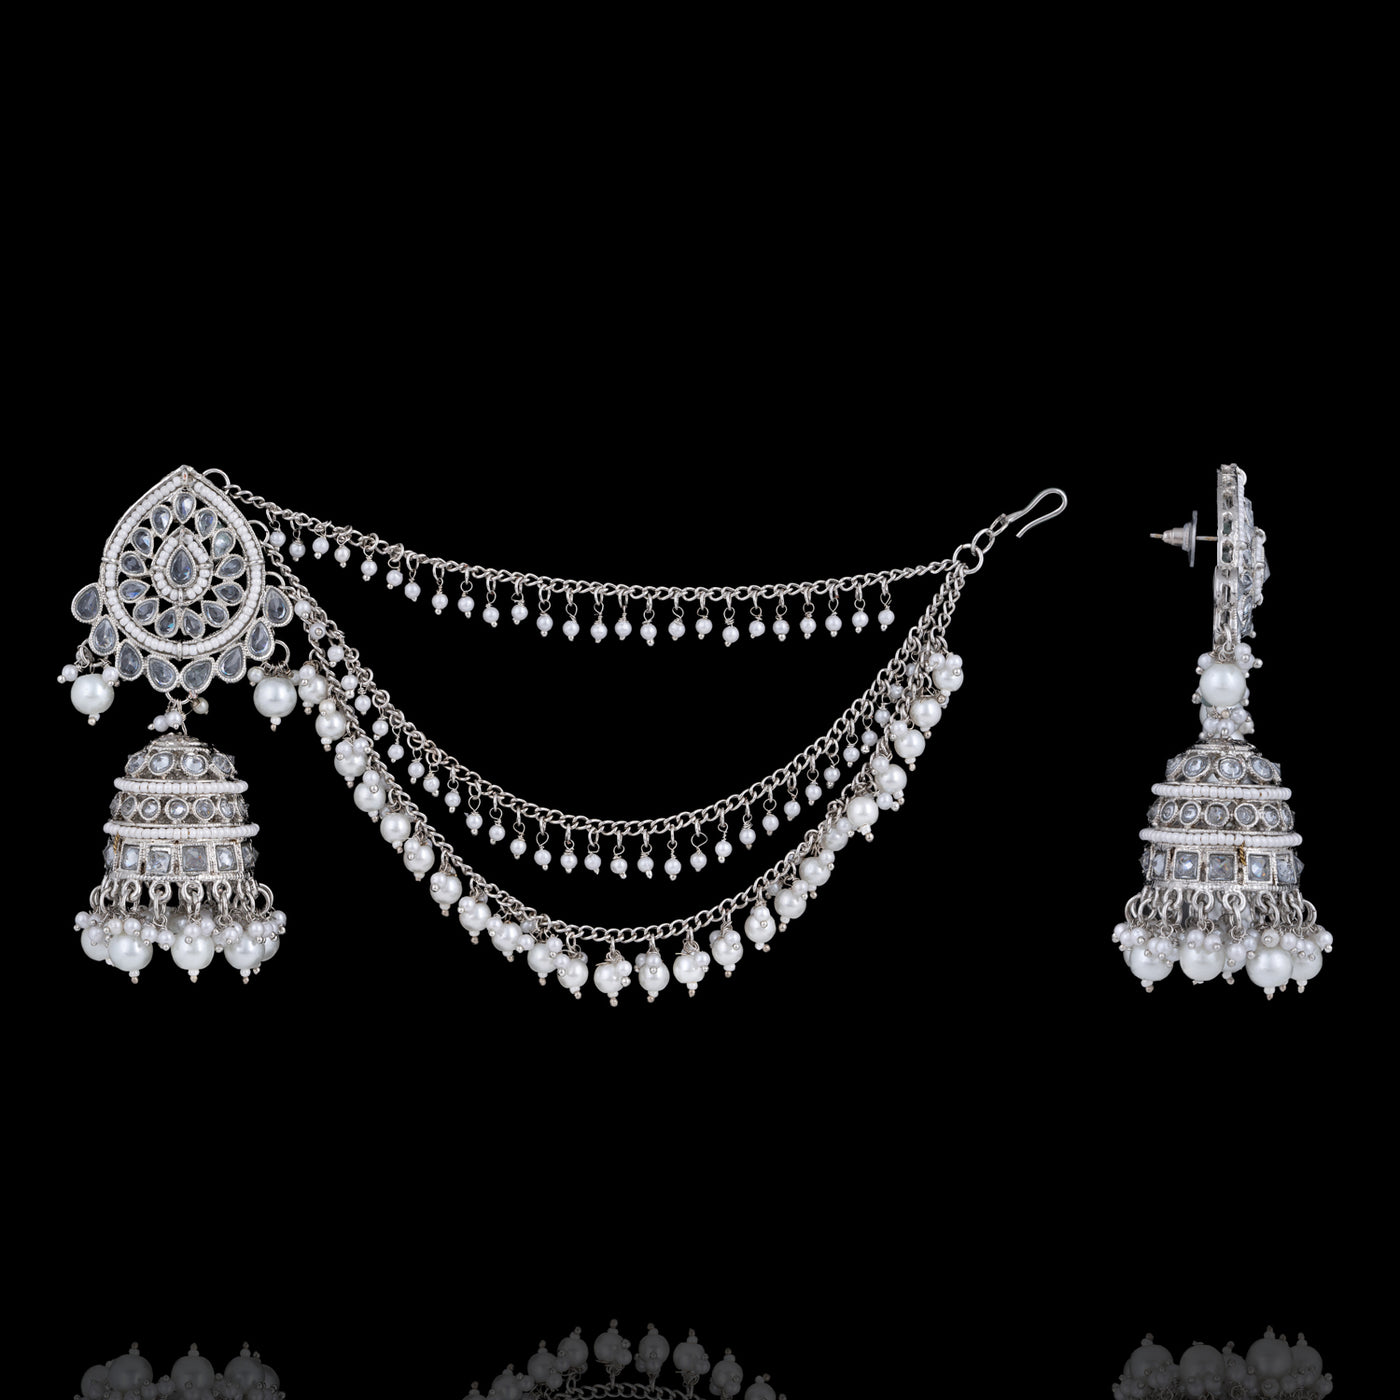 Lalita Set - Available in 2 Options